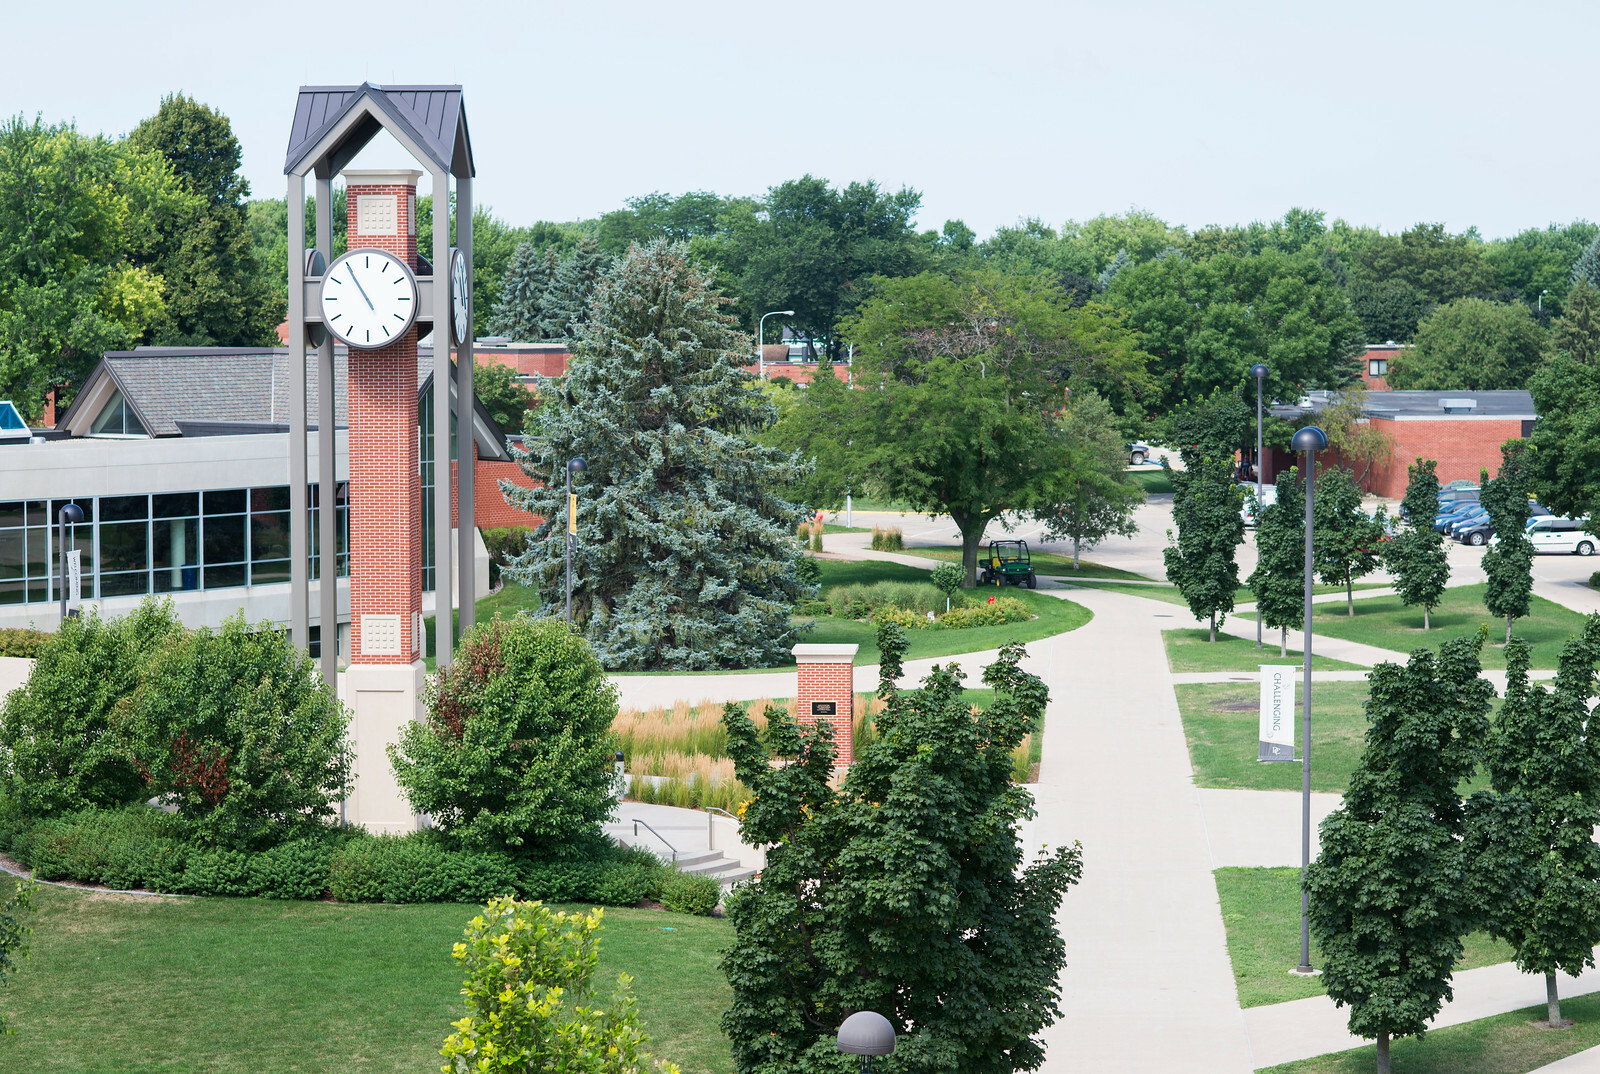 A picture of the Dordt clocktower